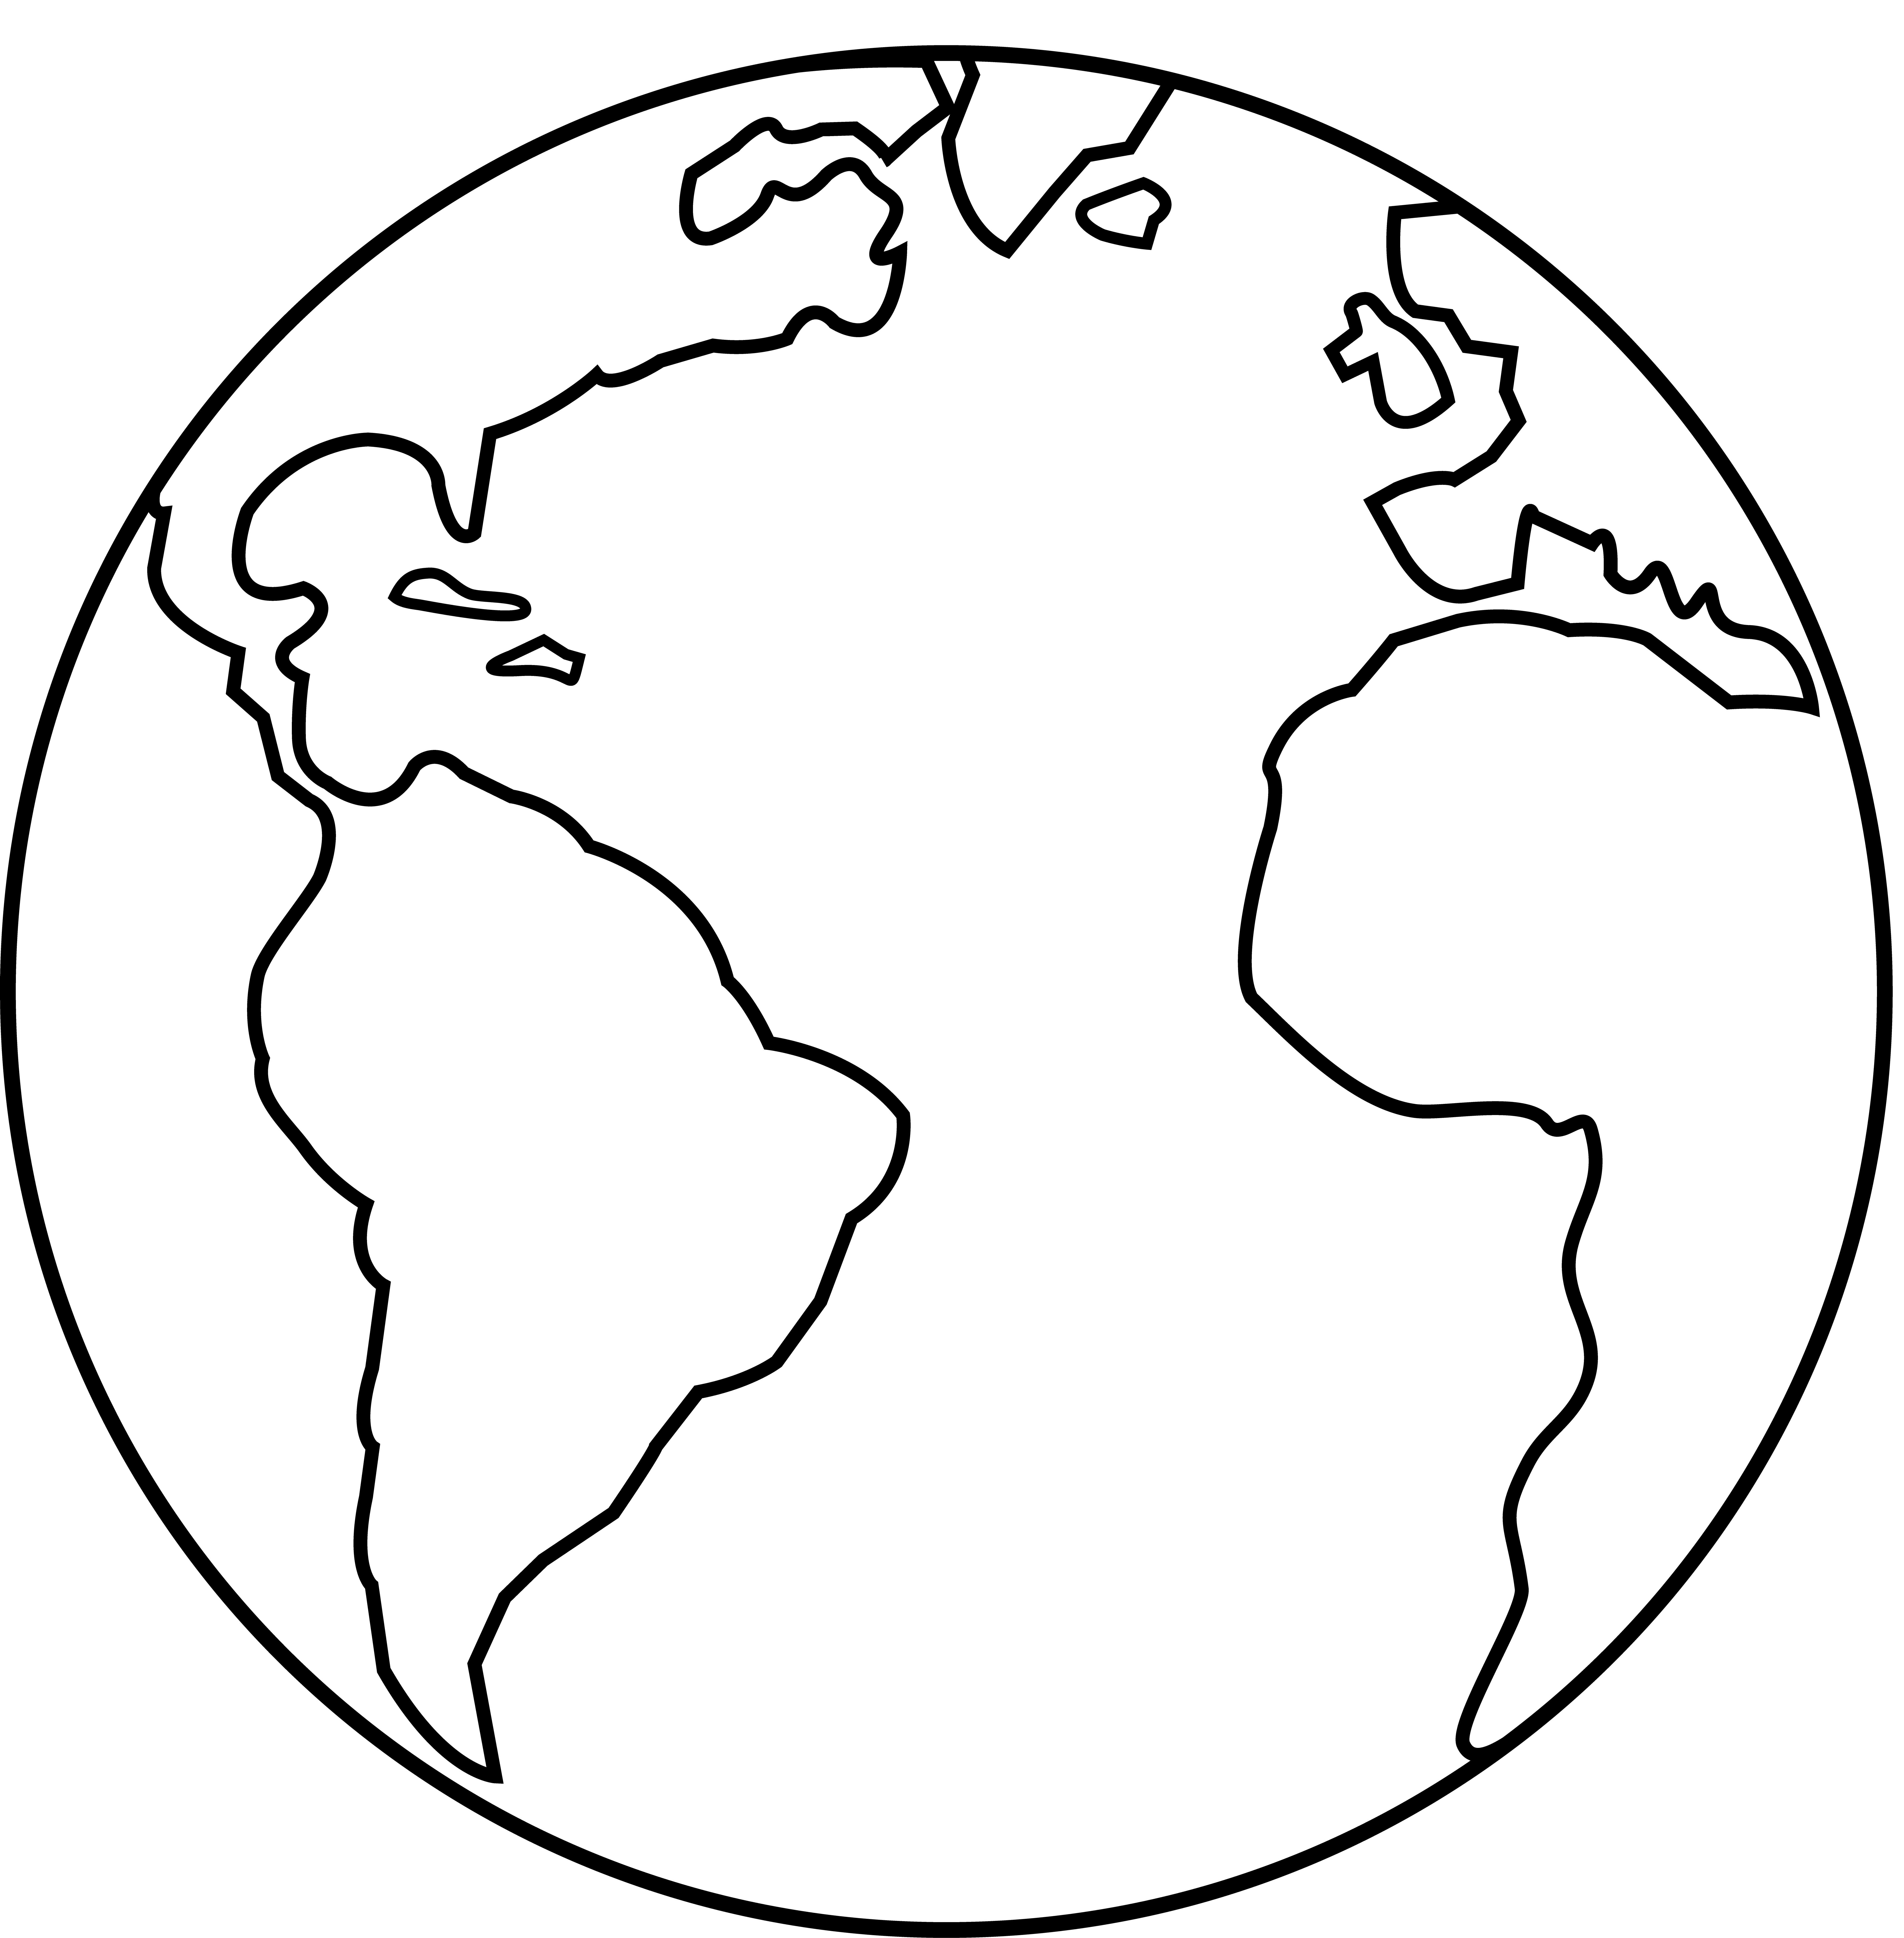 Earth Clipart Black And White | Clipart library - Free Clipart Images